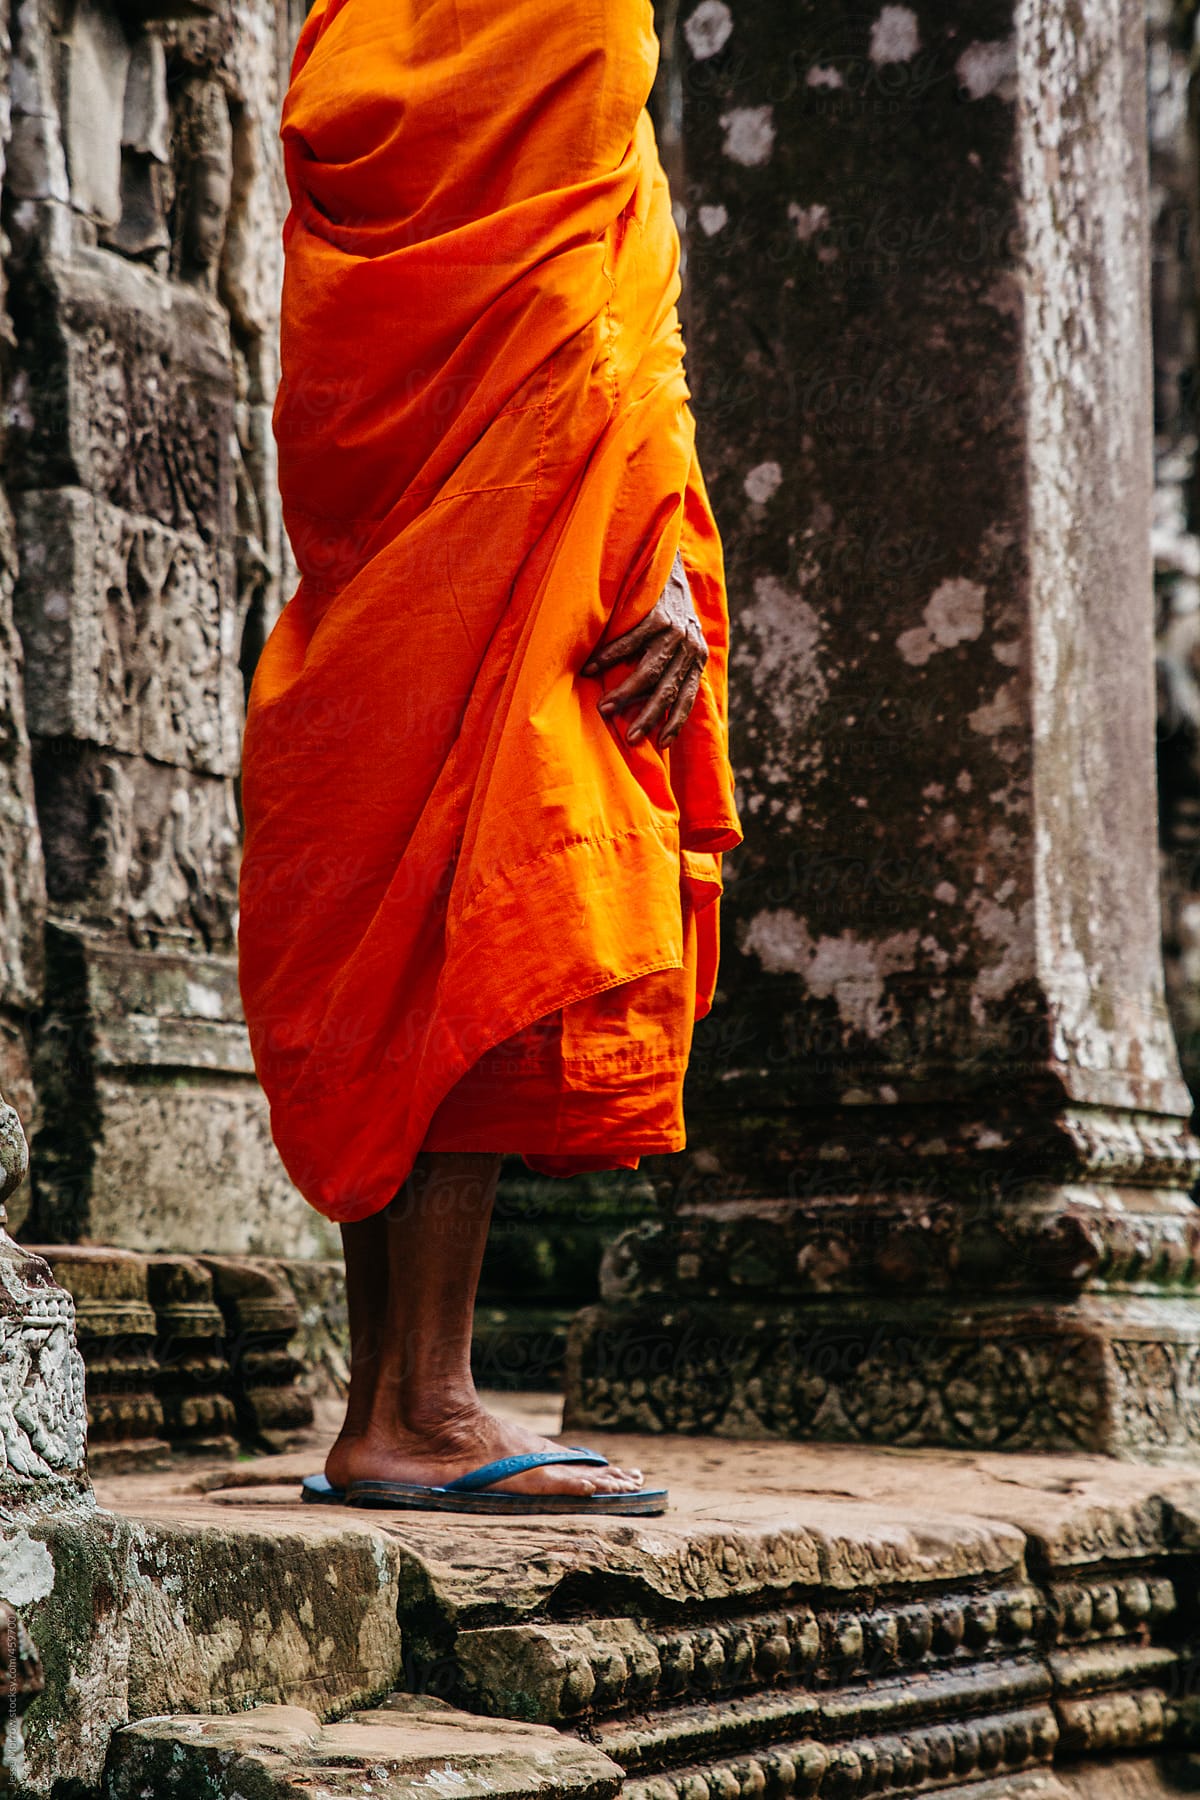 Monk stands in front of temple holding robe